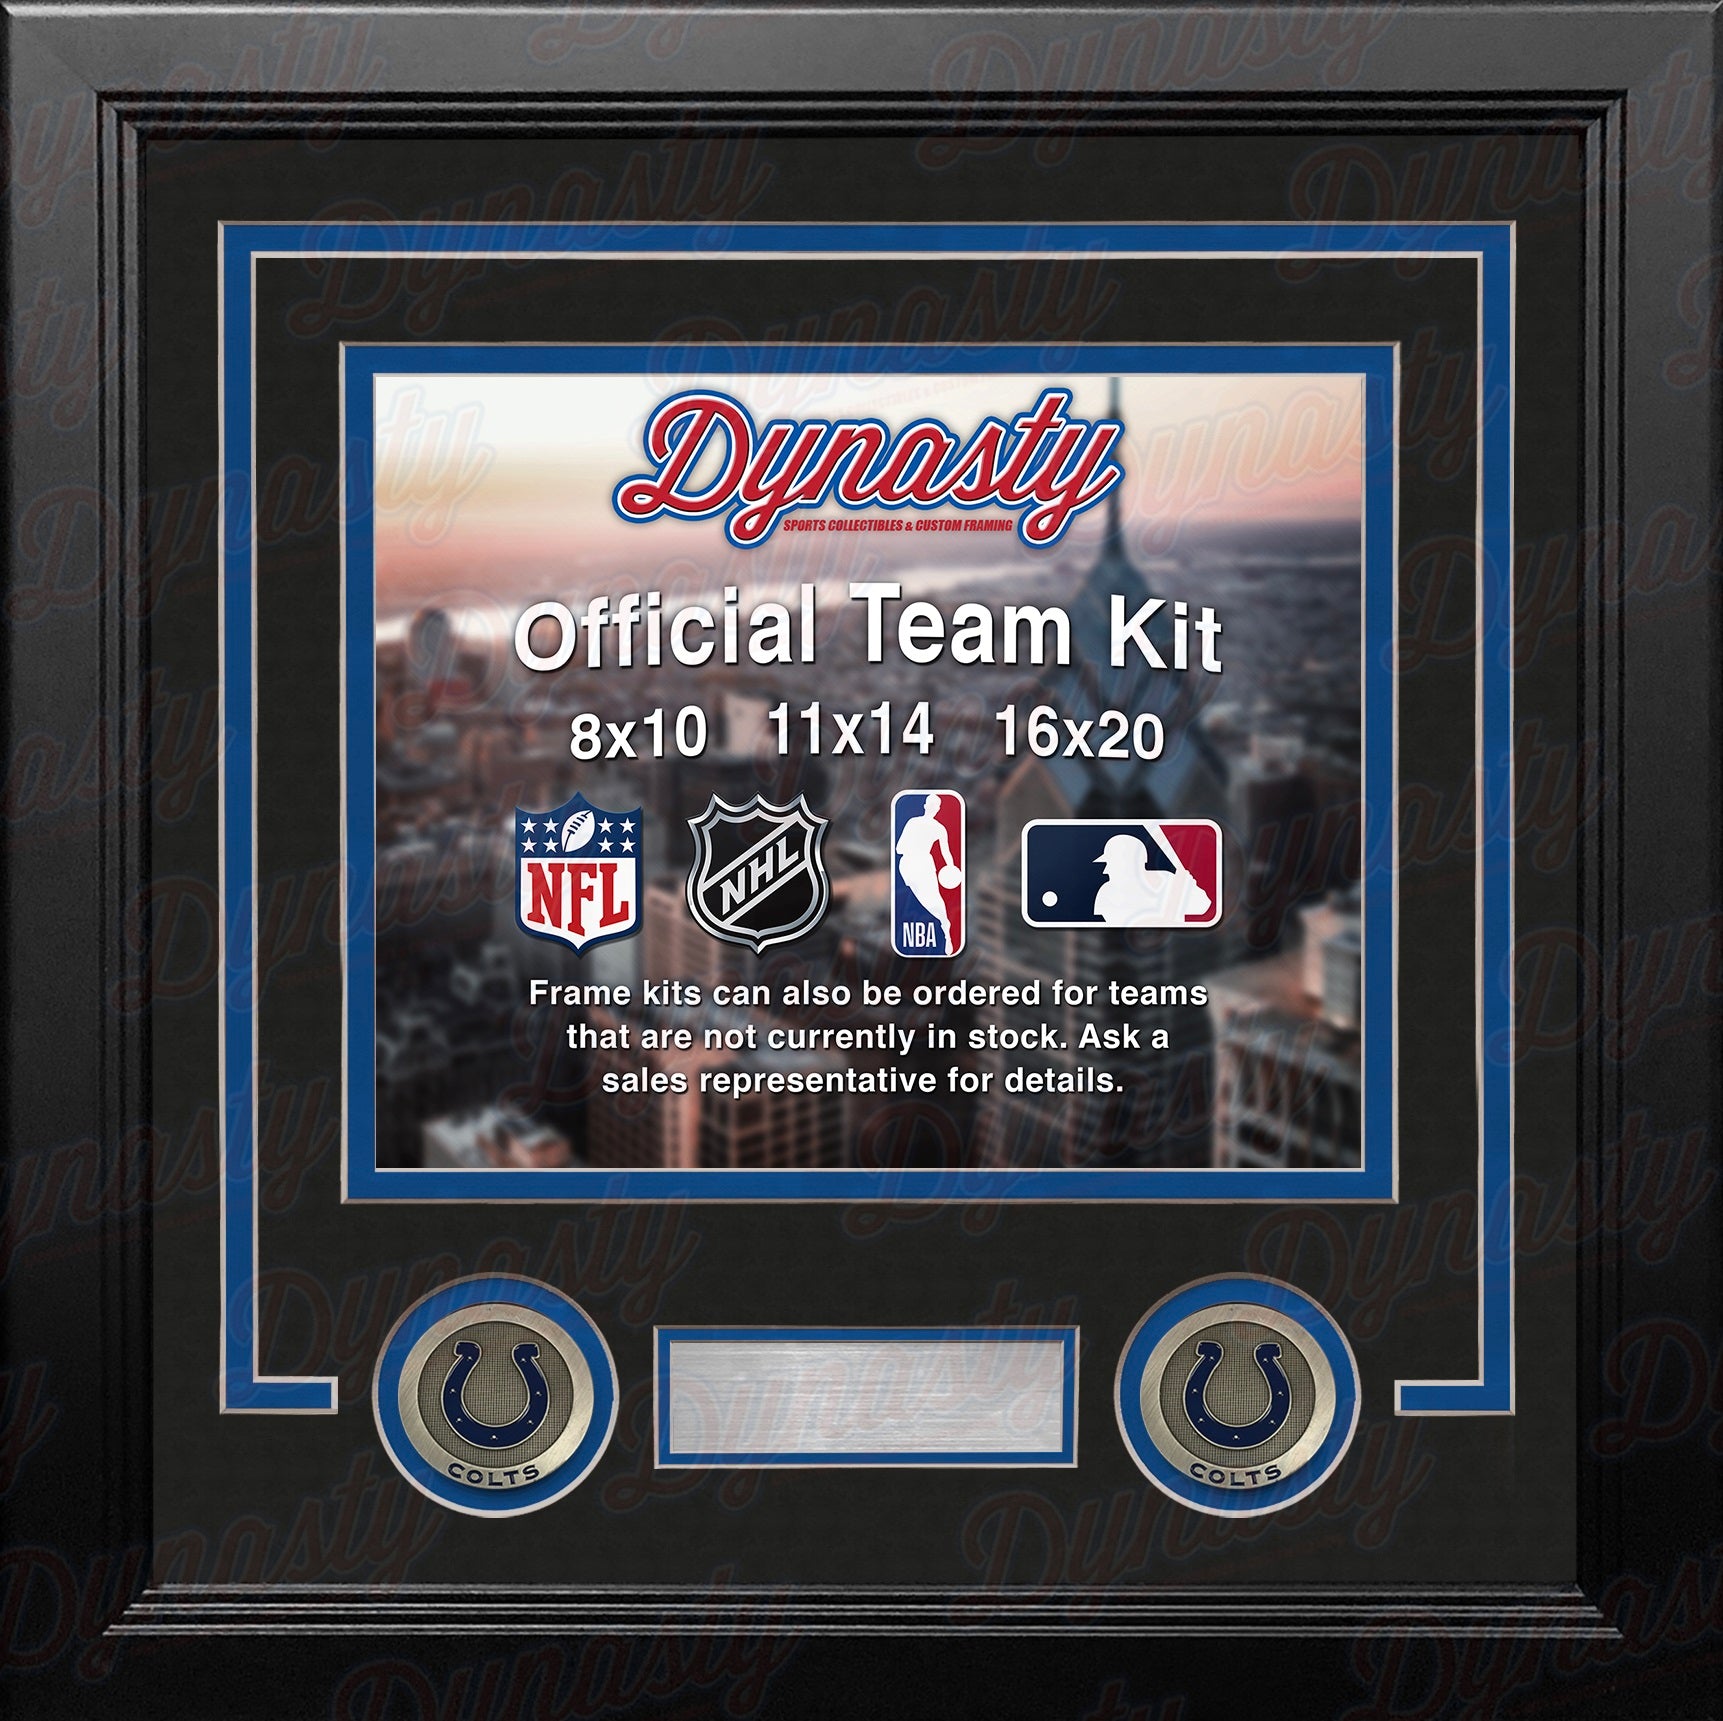 Indianapolis Colts Custom NFL Football 8x10 Picture Frame Kit (Multiple Colors) - Dynasty Sports & Framing 